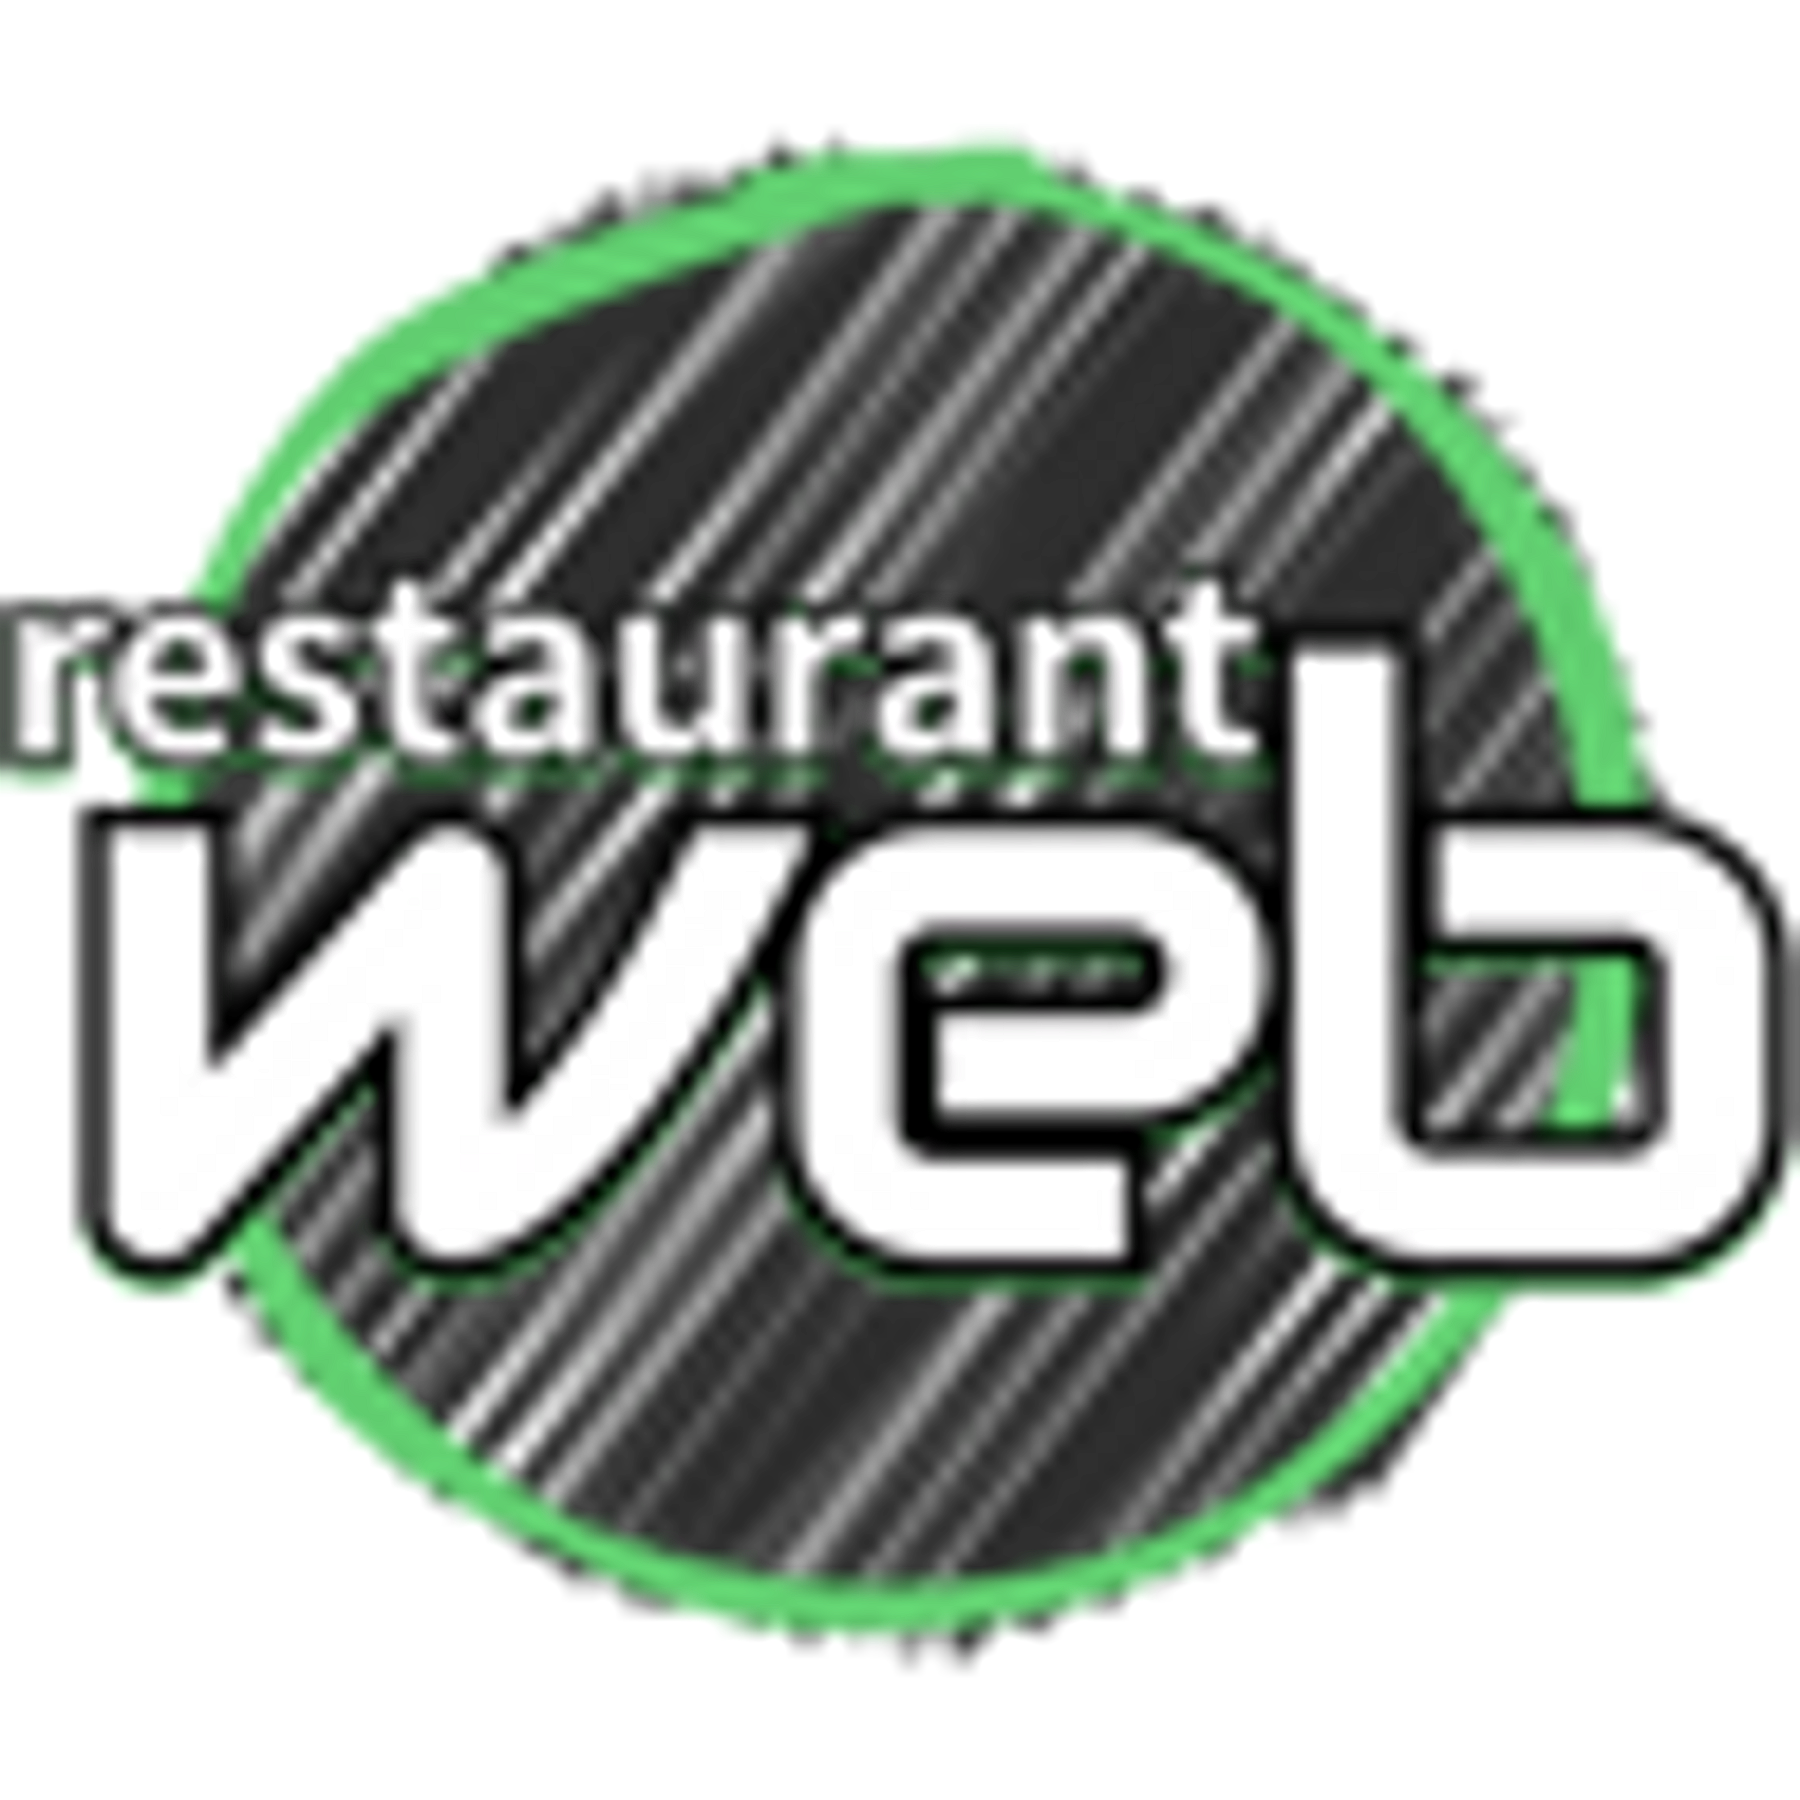 Restaurant Web | Blog by the Industry Direct